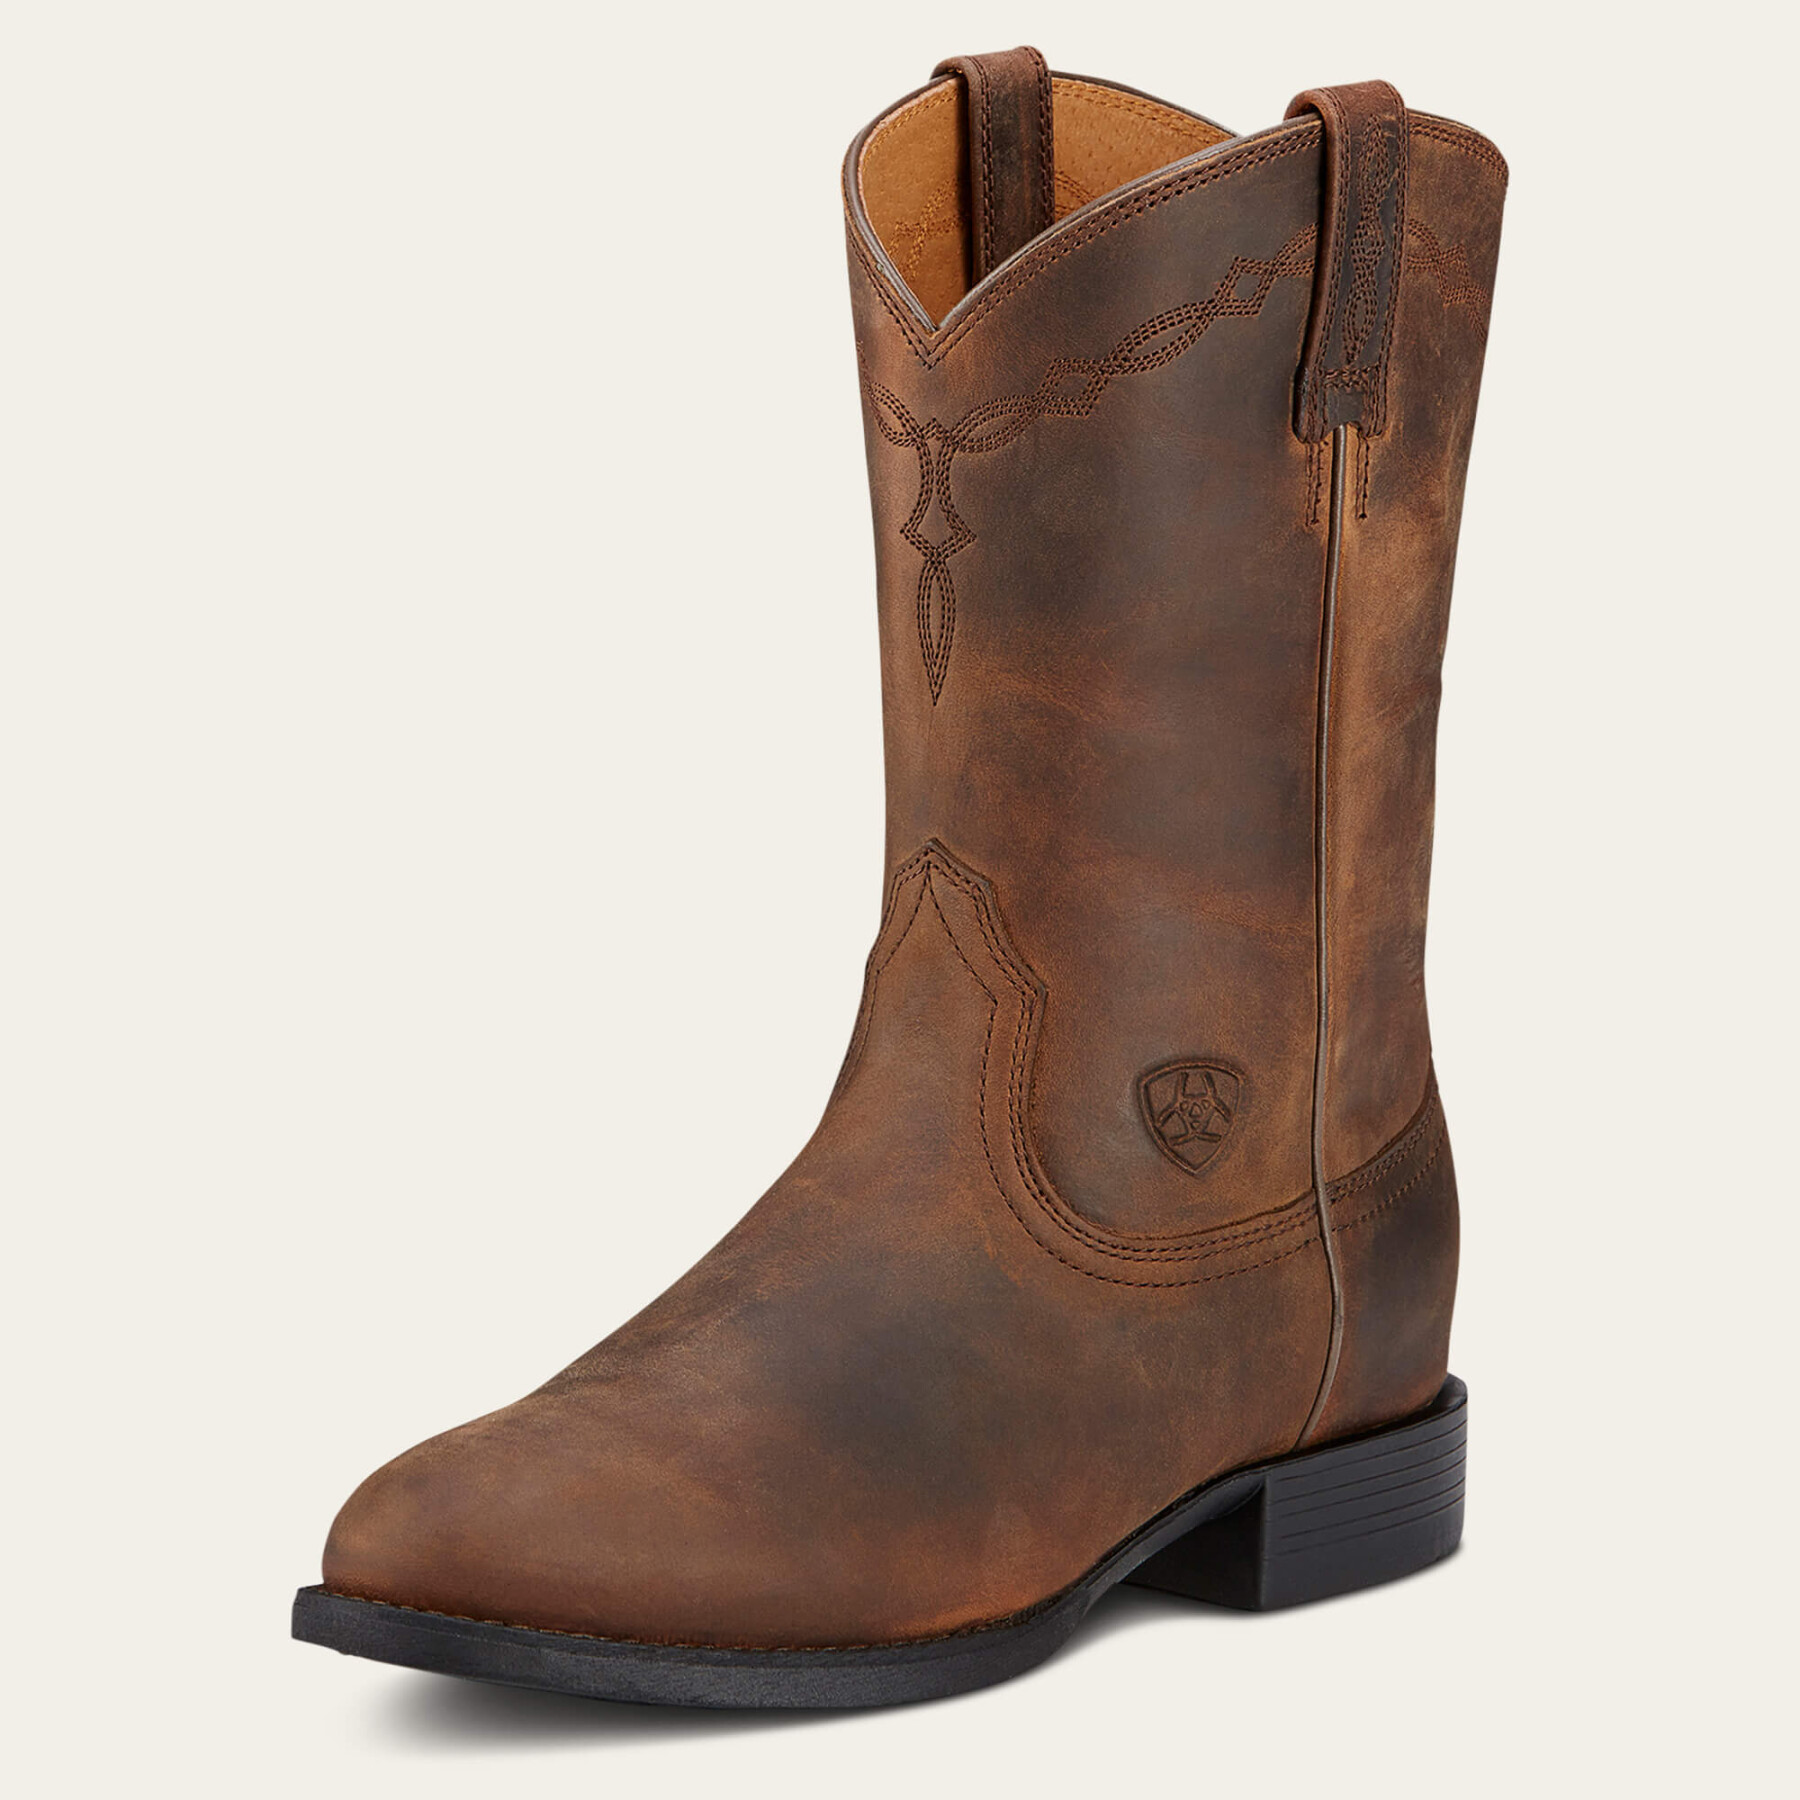 Women's leather western boots Ariat Heritage Roper